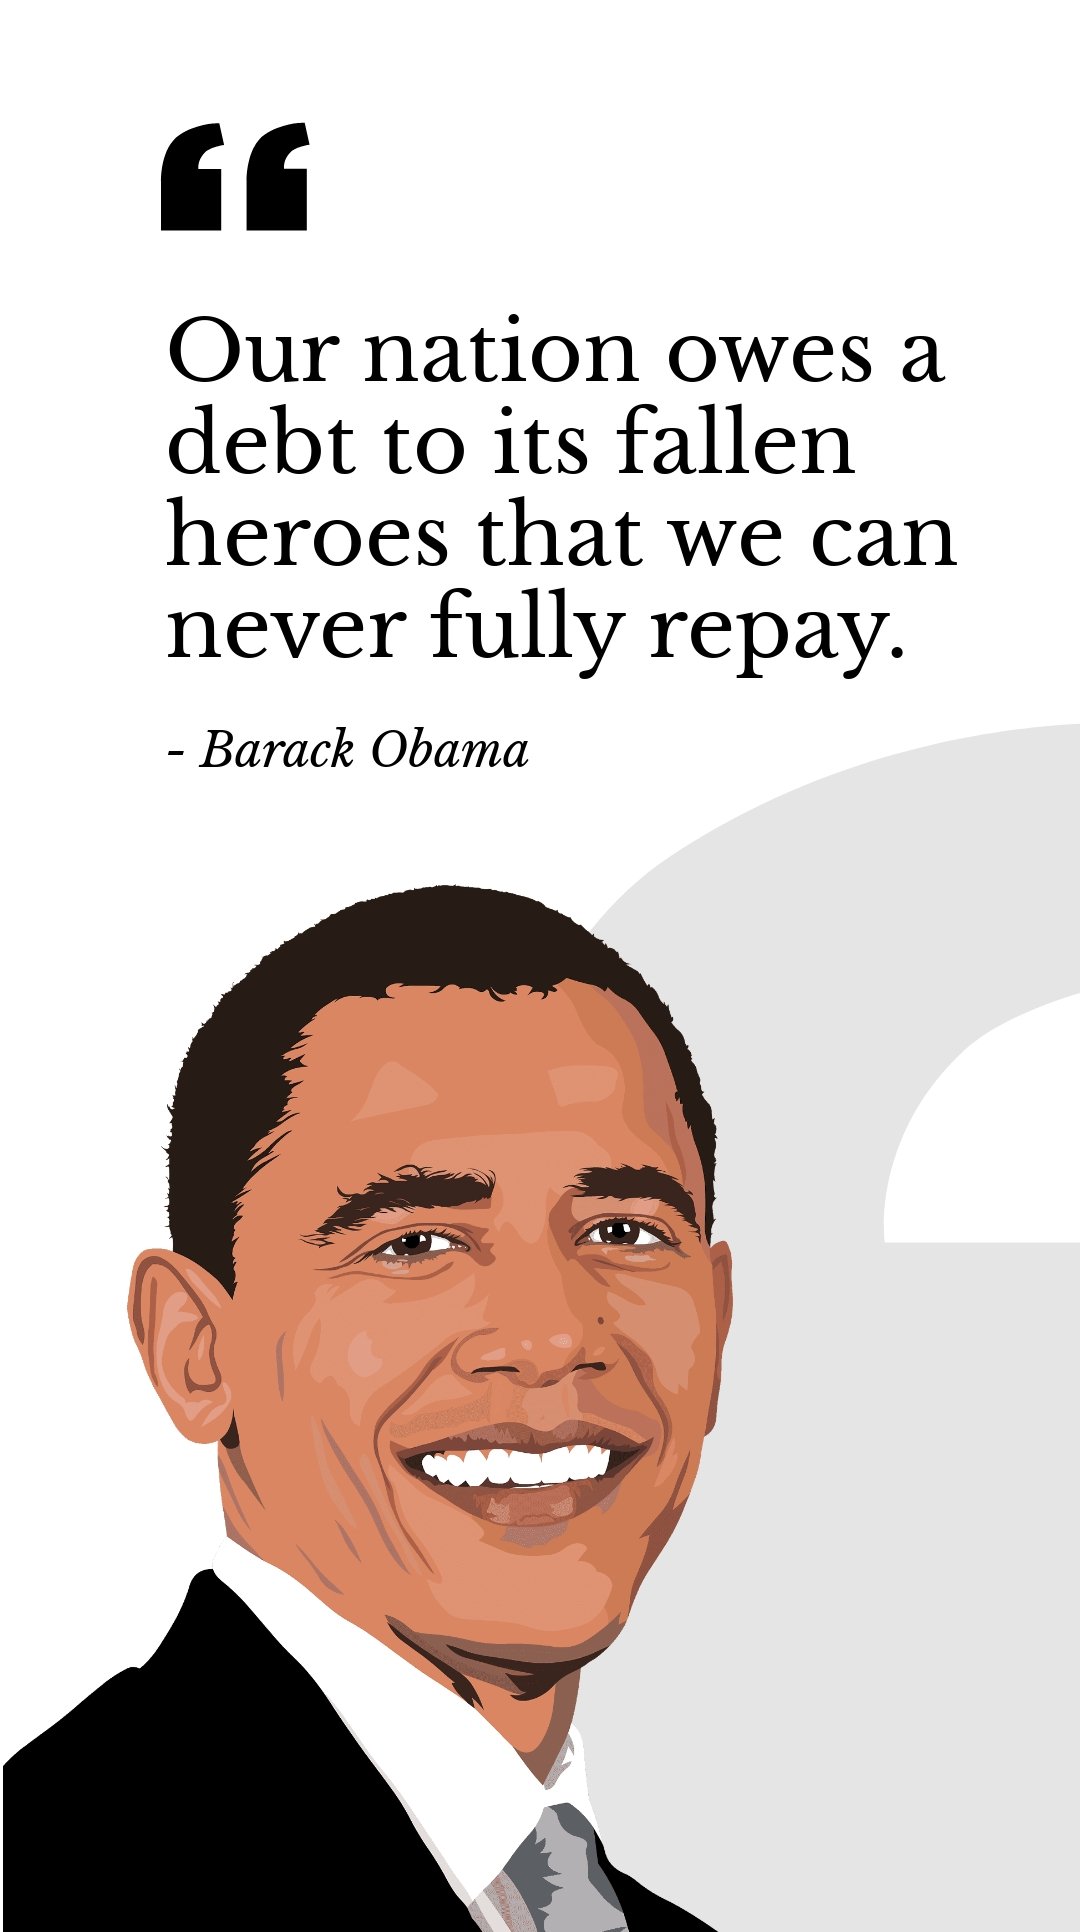 Free Barack Obama - "Our nation owes a debt to its fallen heroes that we can never fully repay." in JPG